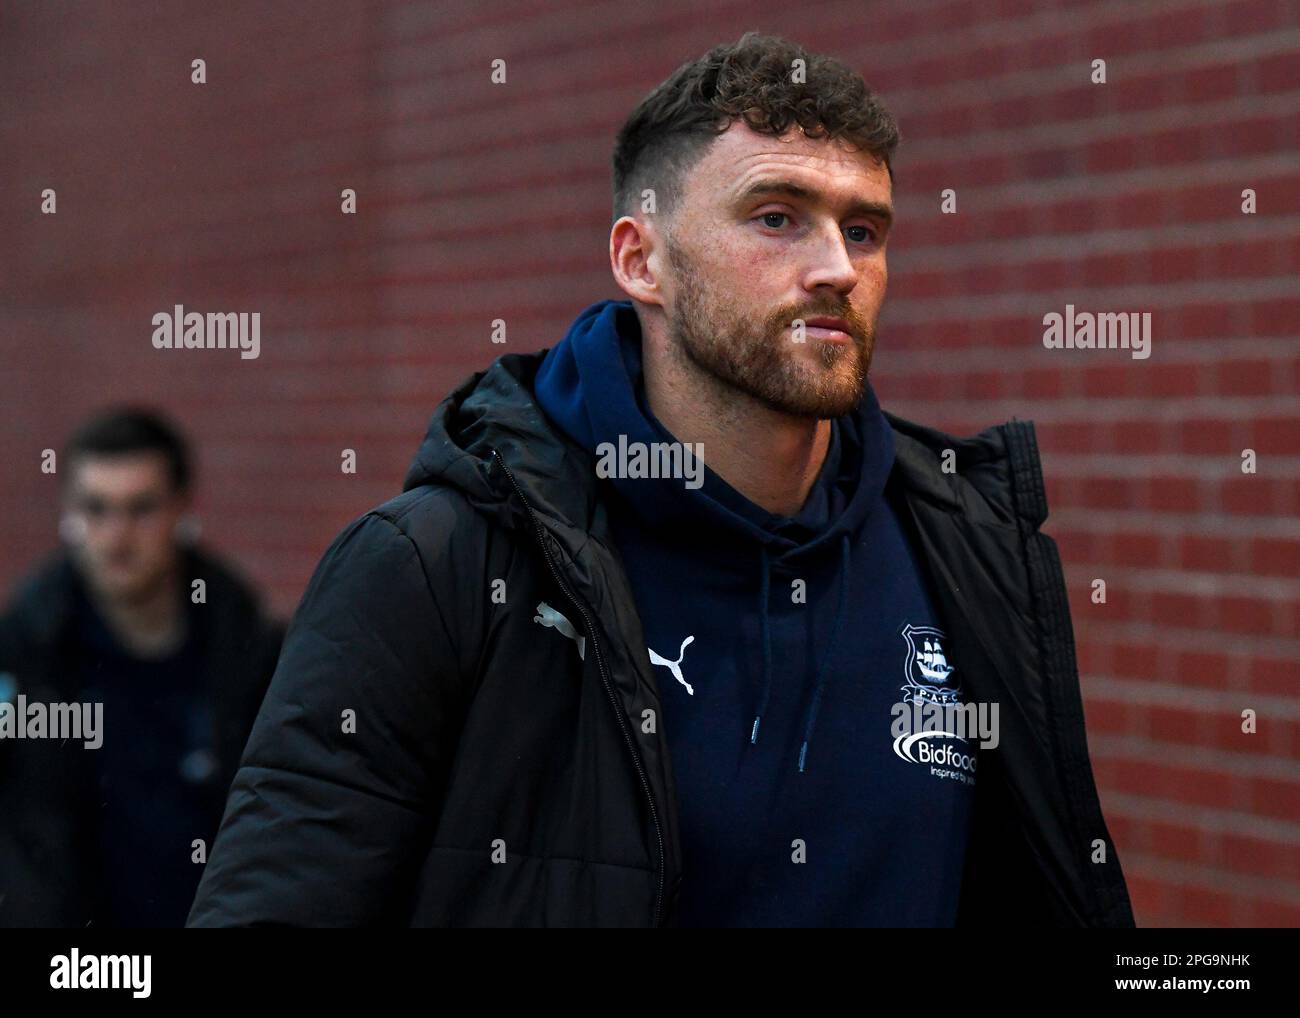 Dan Scarr #6 of Plymouth Argyle arrives during the Sky Bet League 1 match Accrington Stanley vs Plymouth Argyle at Wham Stadium, Accrington, United Kingdom, 21st March 2023  (Photo by Stan Kasala/News Images) Stock Photo